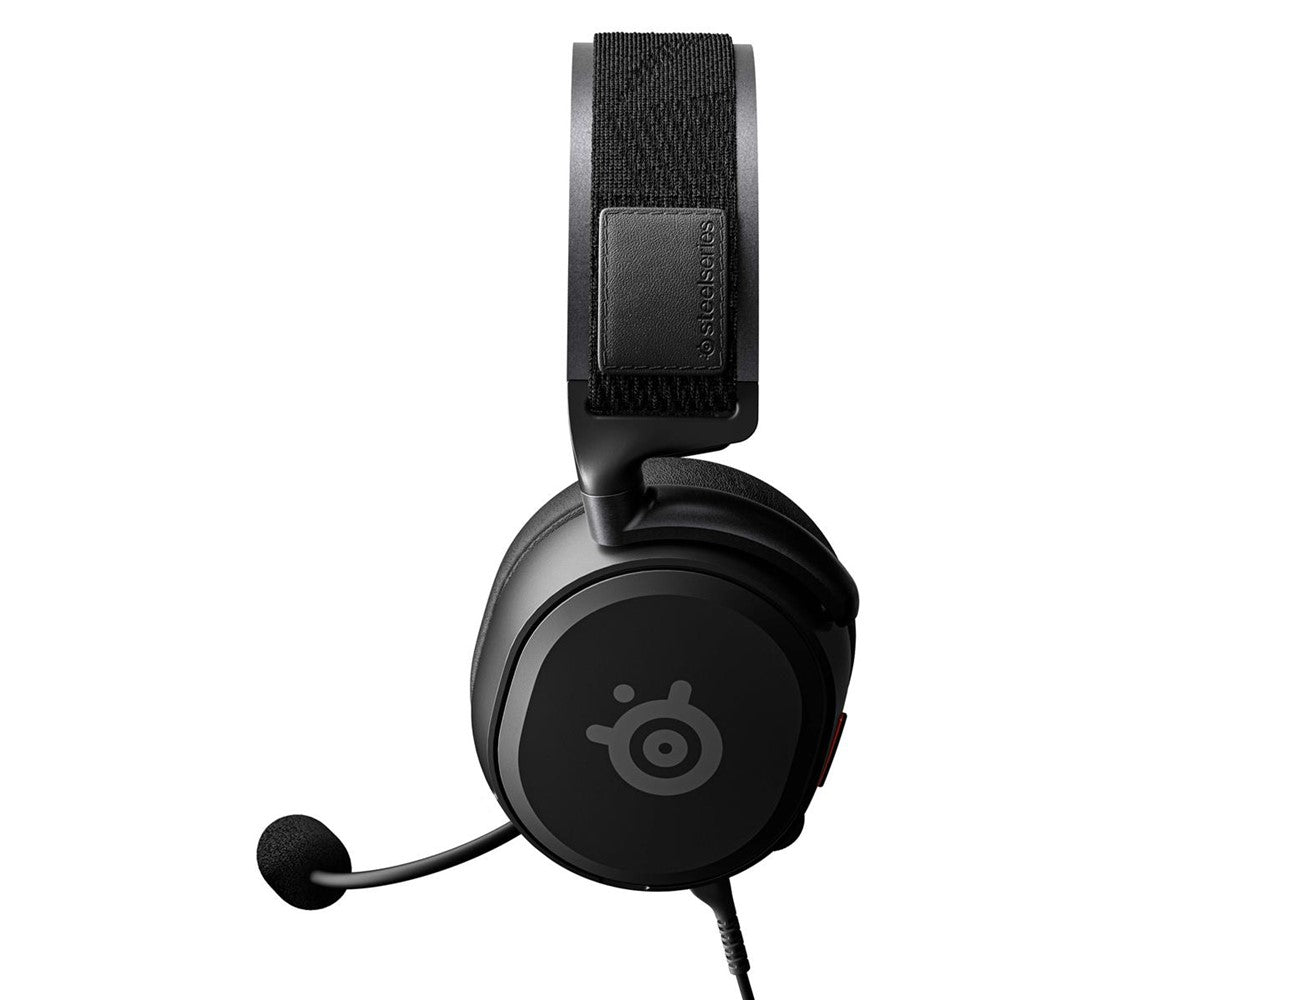 SteelSeries Arctis Prime - Competitive Gaming Headset